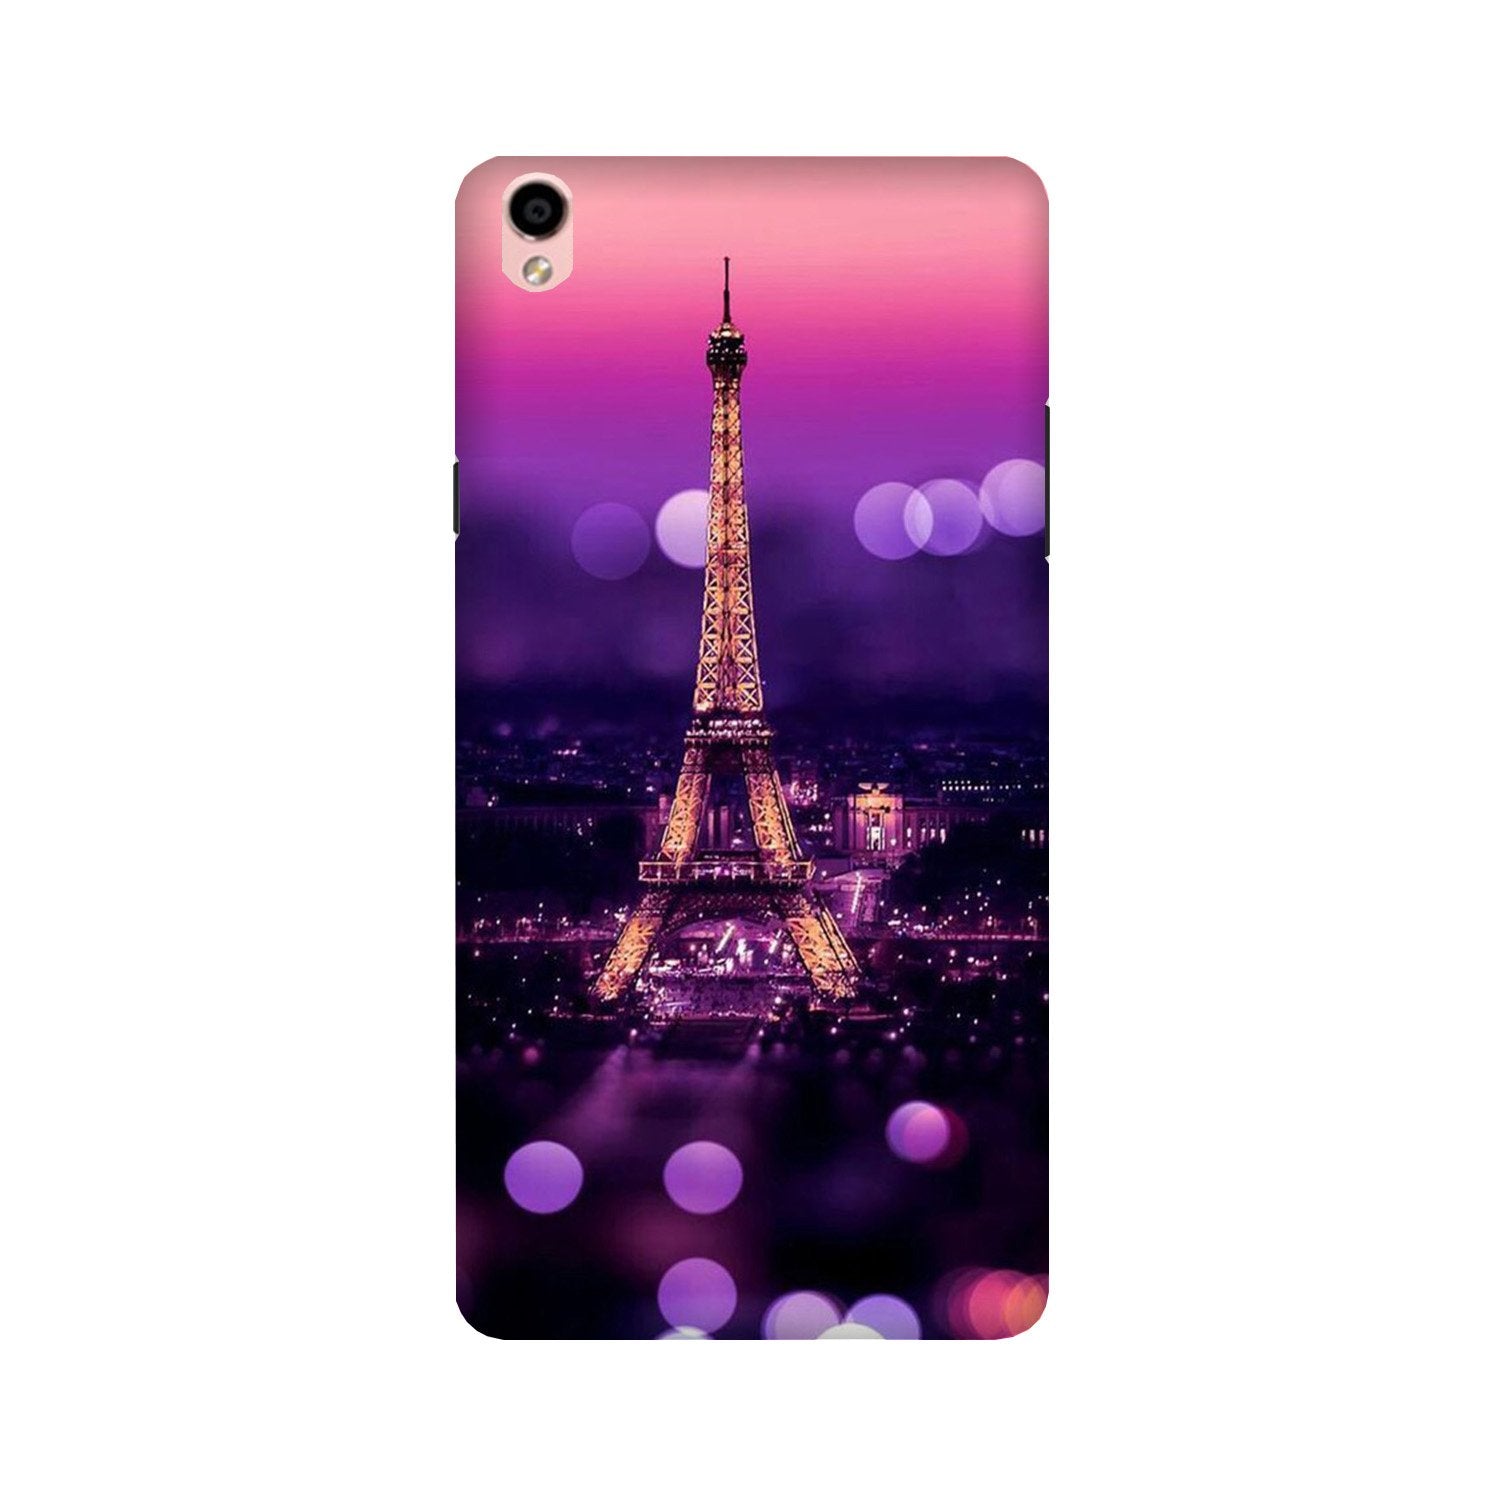 Eiffel Tower Case for Oppo F1 Plus